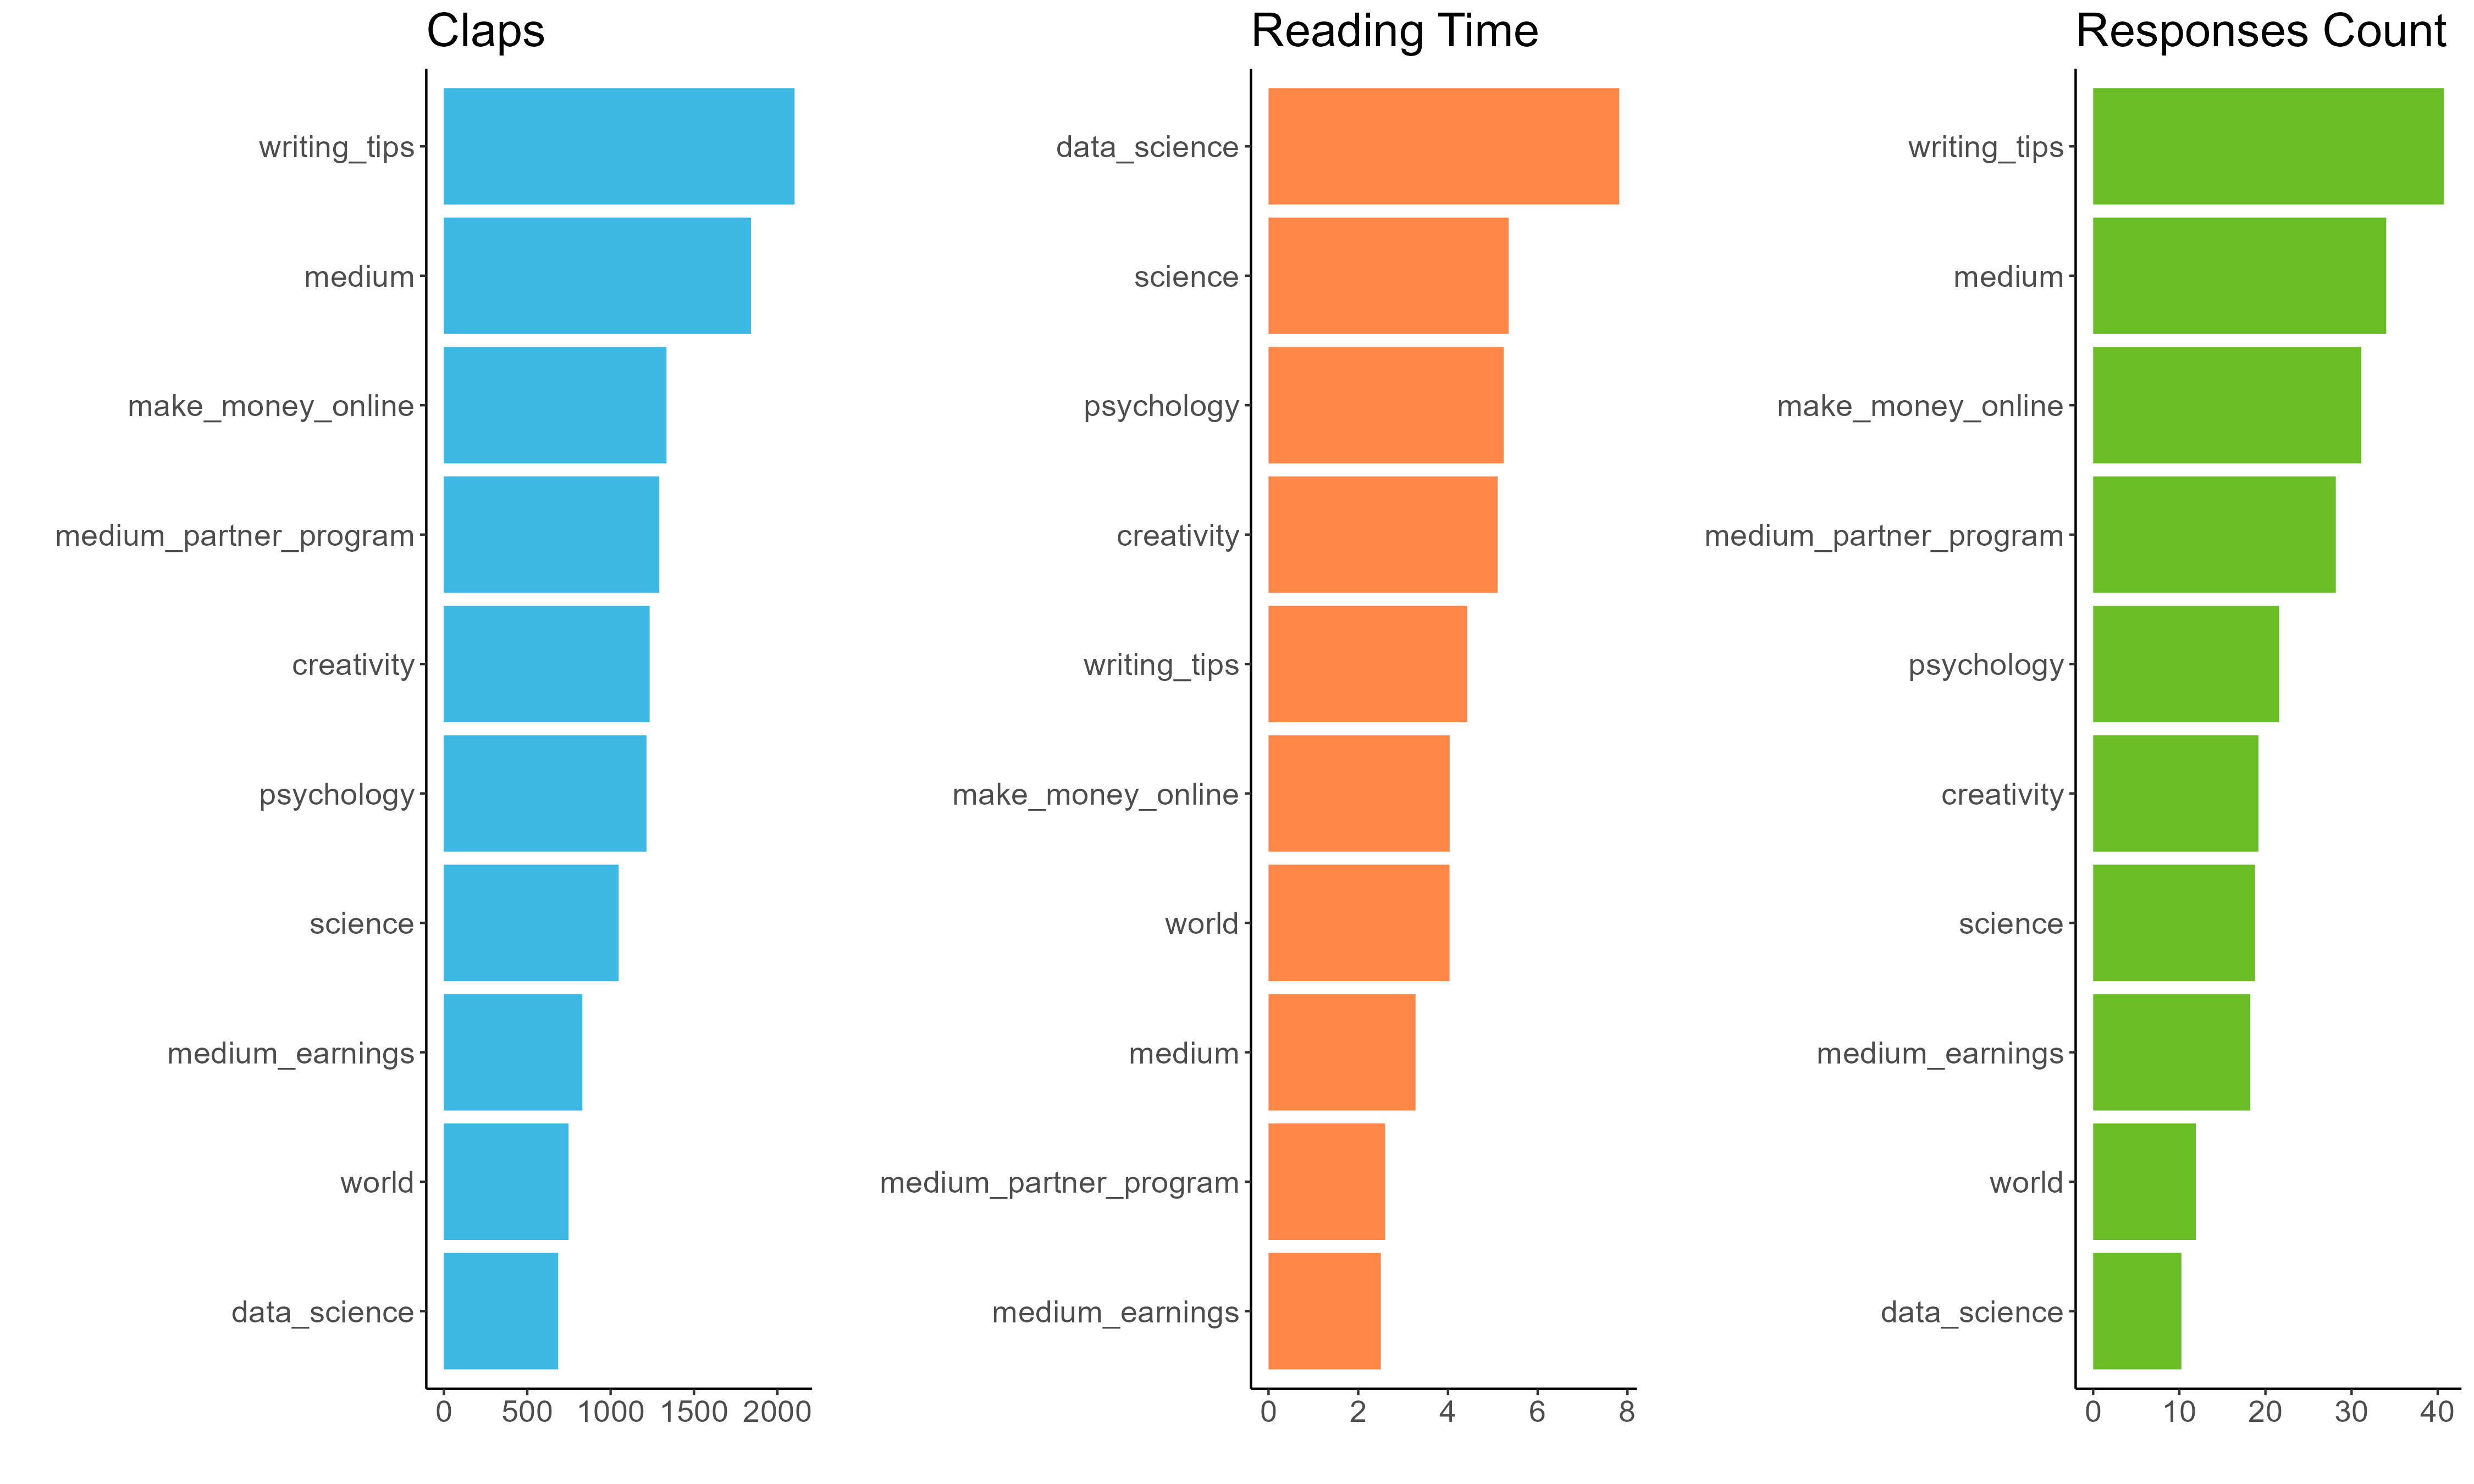 Claps, reading time and responses per article within each tag.